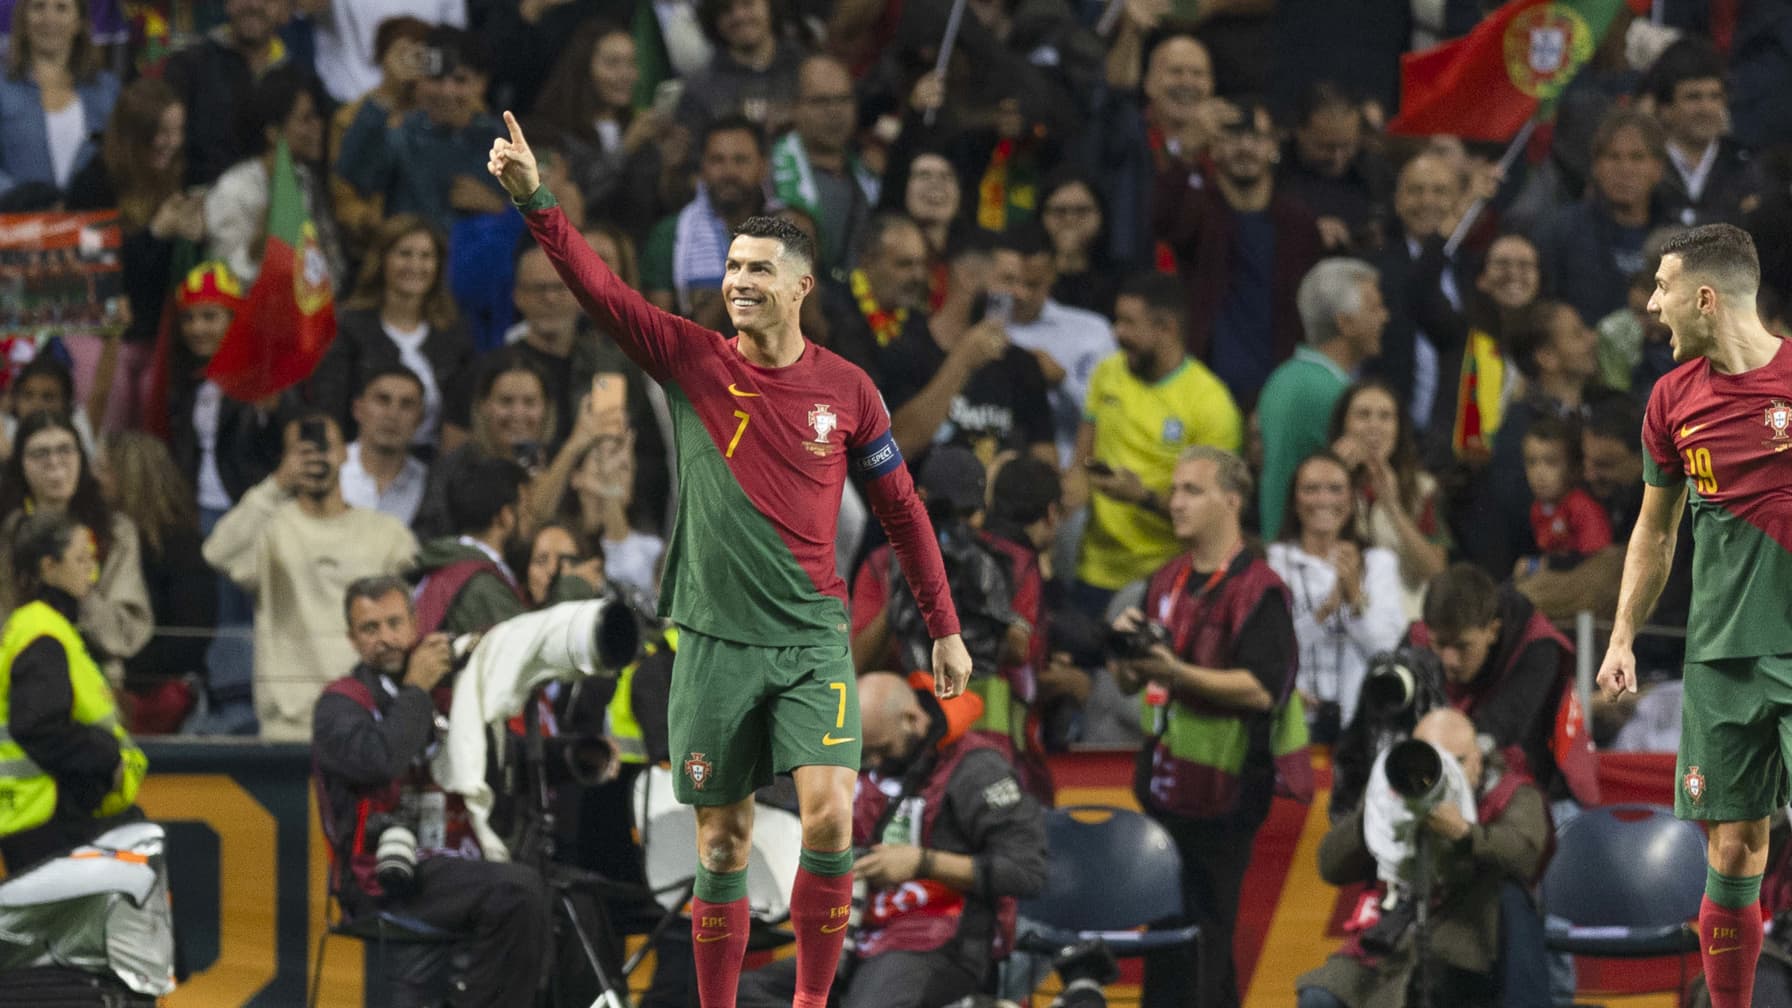 Portugal and Belgium qualified for the European Championship in Germany